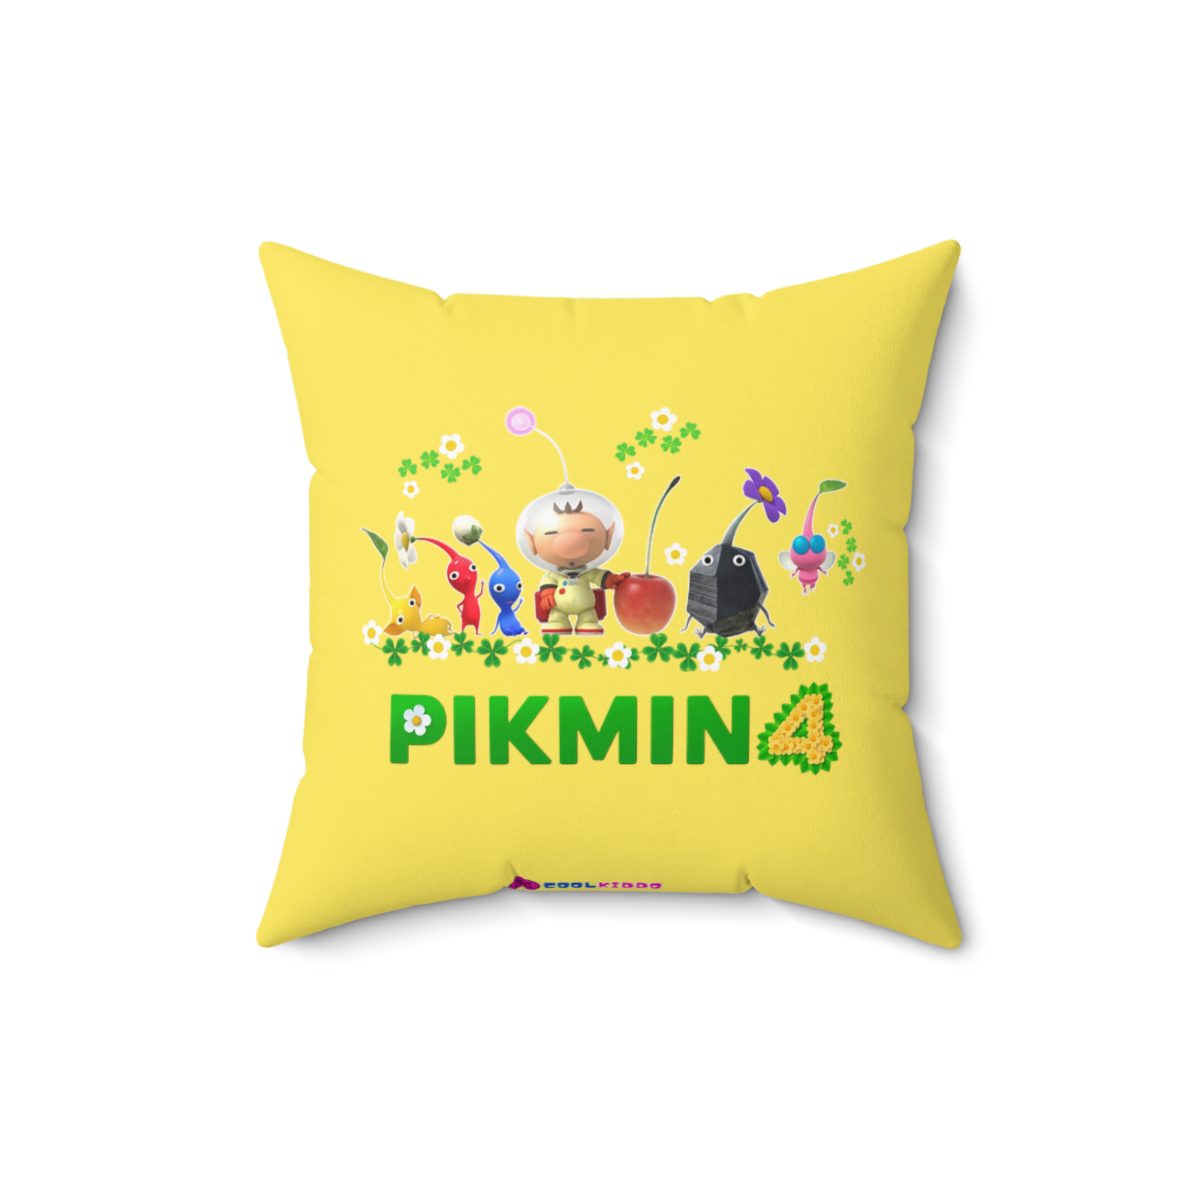 Pikmin 4 Yellow and Light Green Cushion (Double-Sided) Cool Kiddo 10